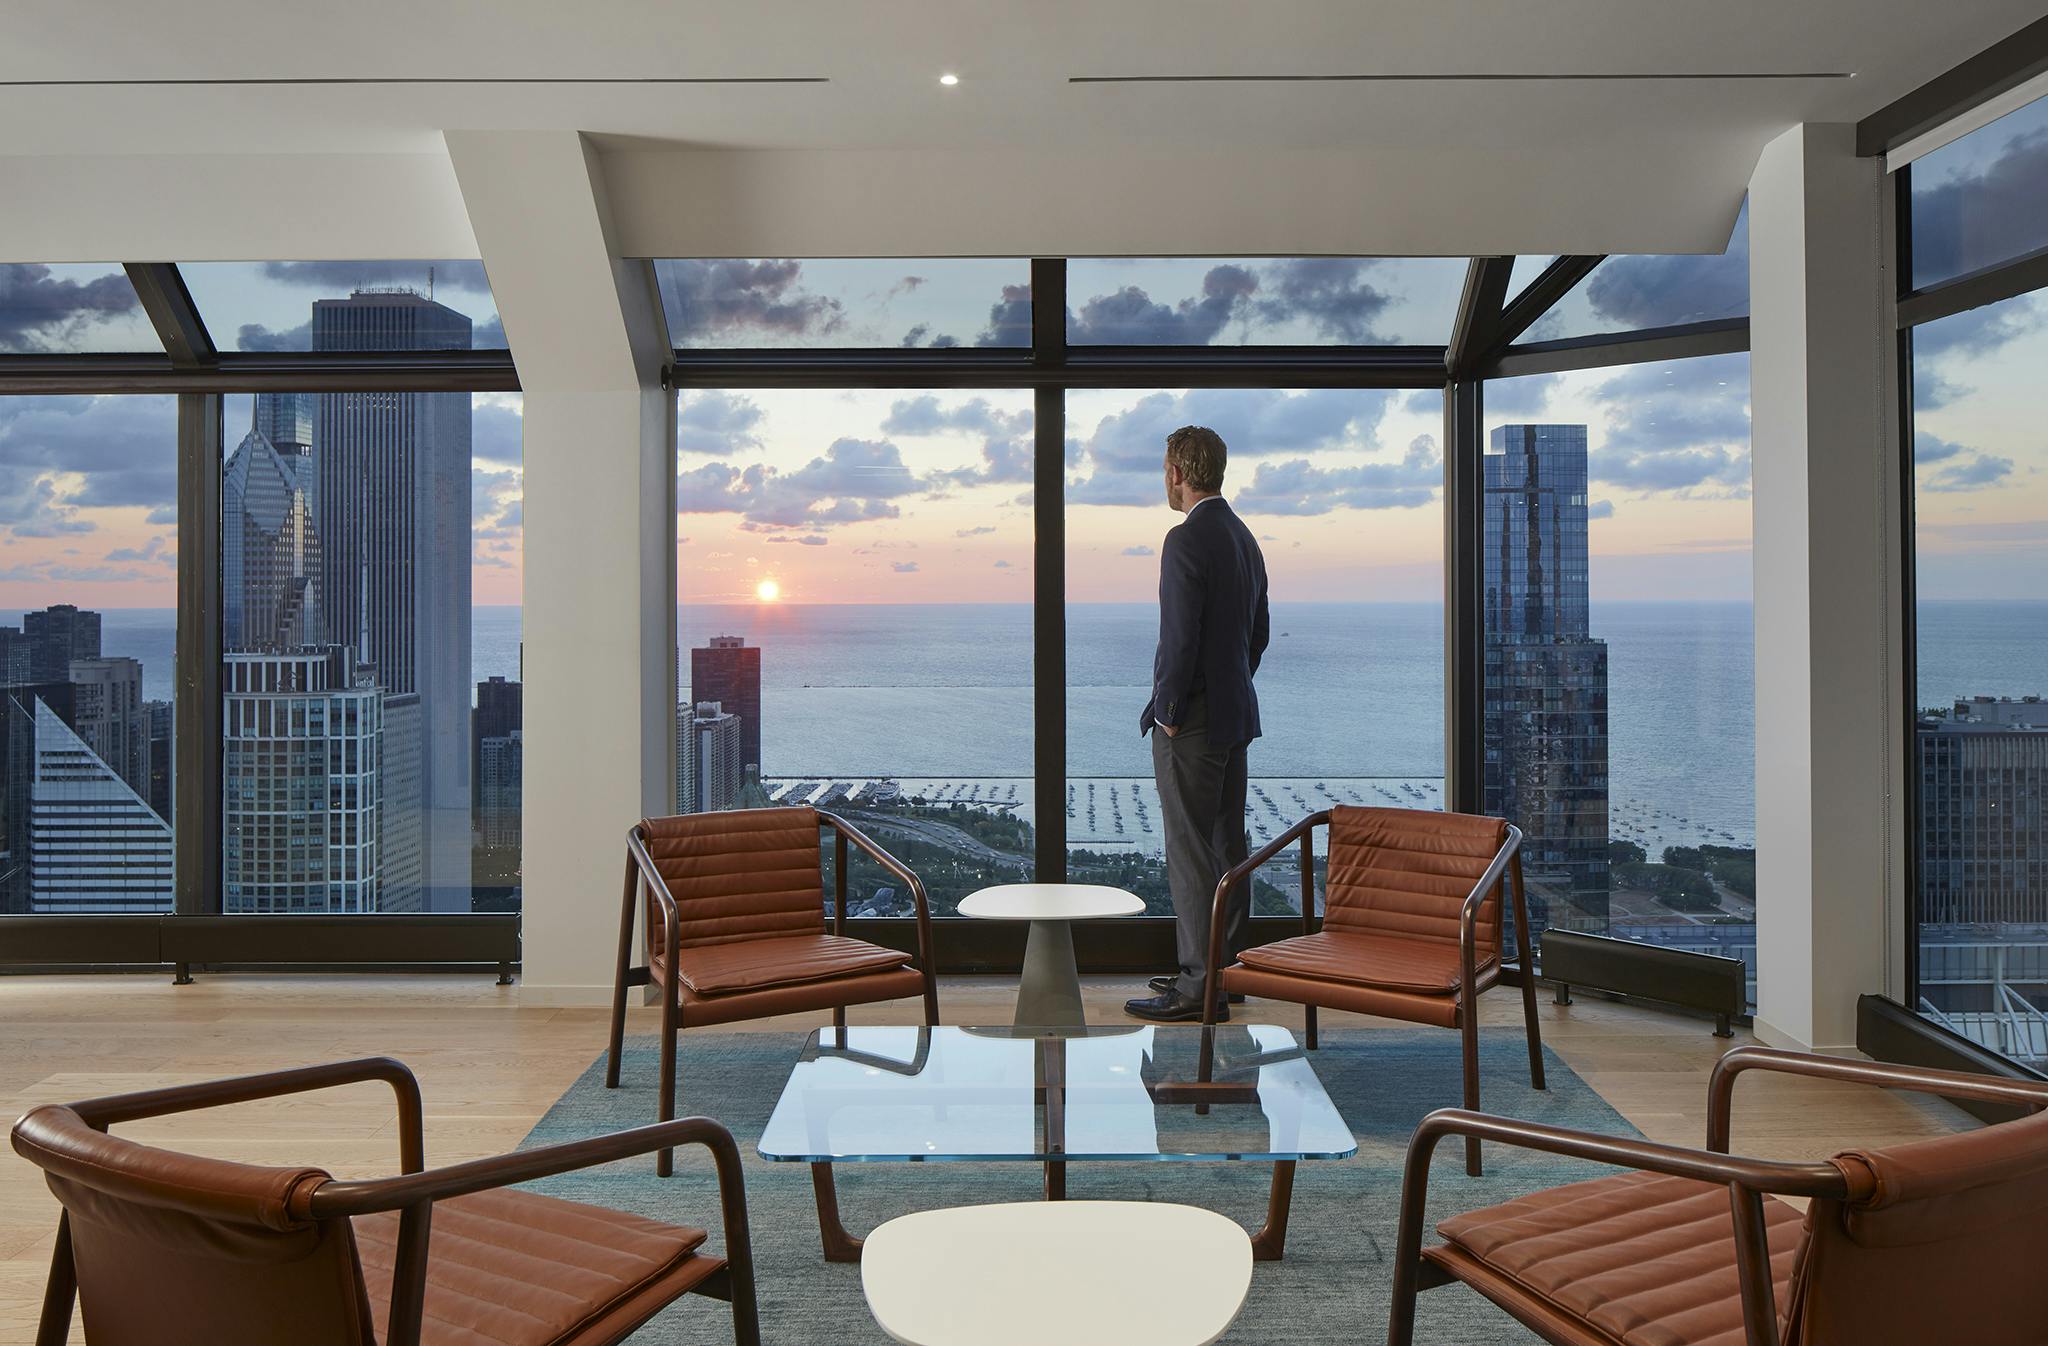 A seating area in Nixon Peabody's Chicago office, with a square glass coffee table surrounded by four brown leather chairs; a person stands behind them, looking through a panel of floor-to-ceiling windows, showing other Chicago skyscrapers and the sun setting over Lake Michigan